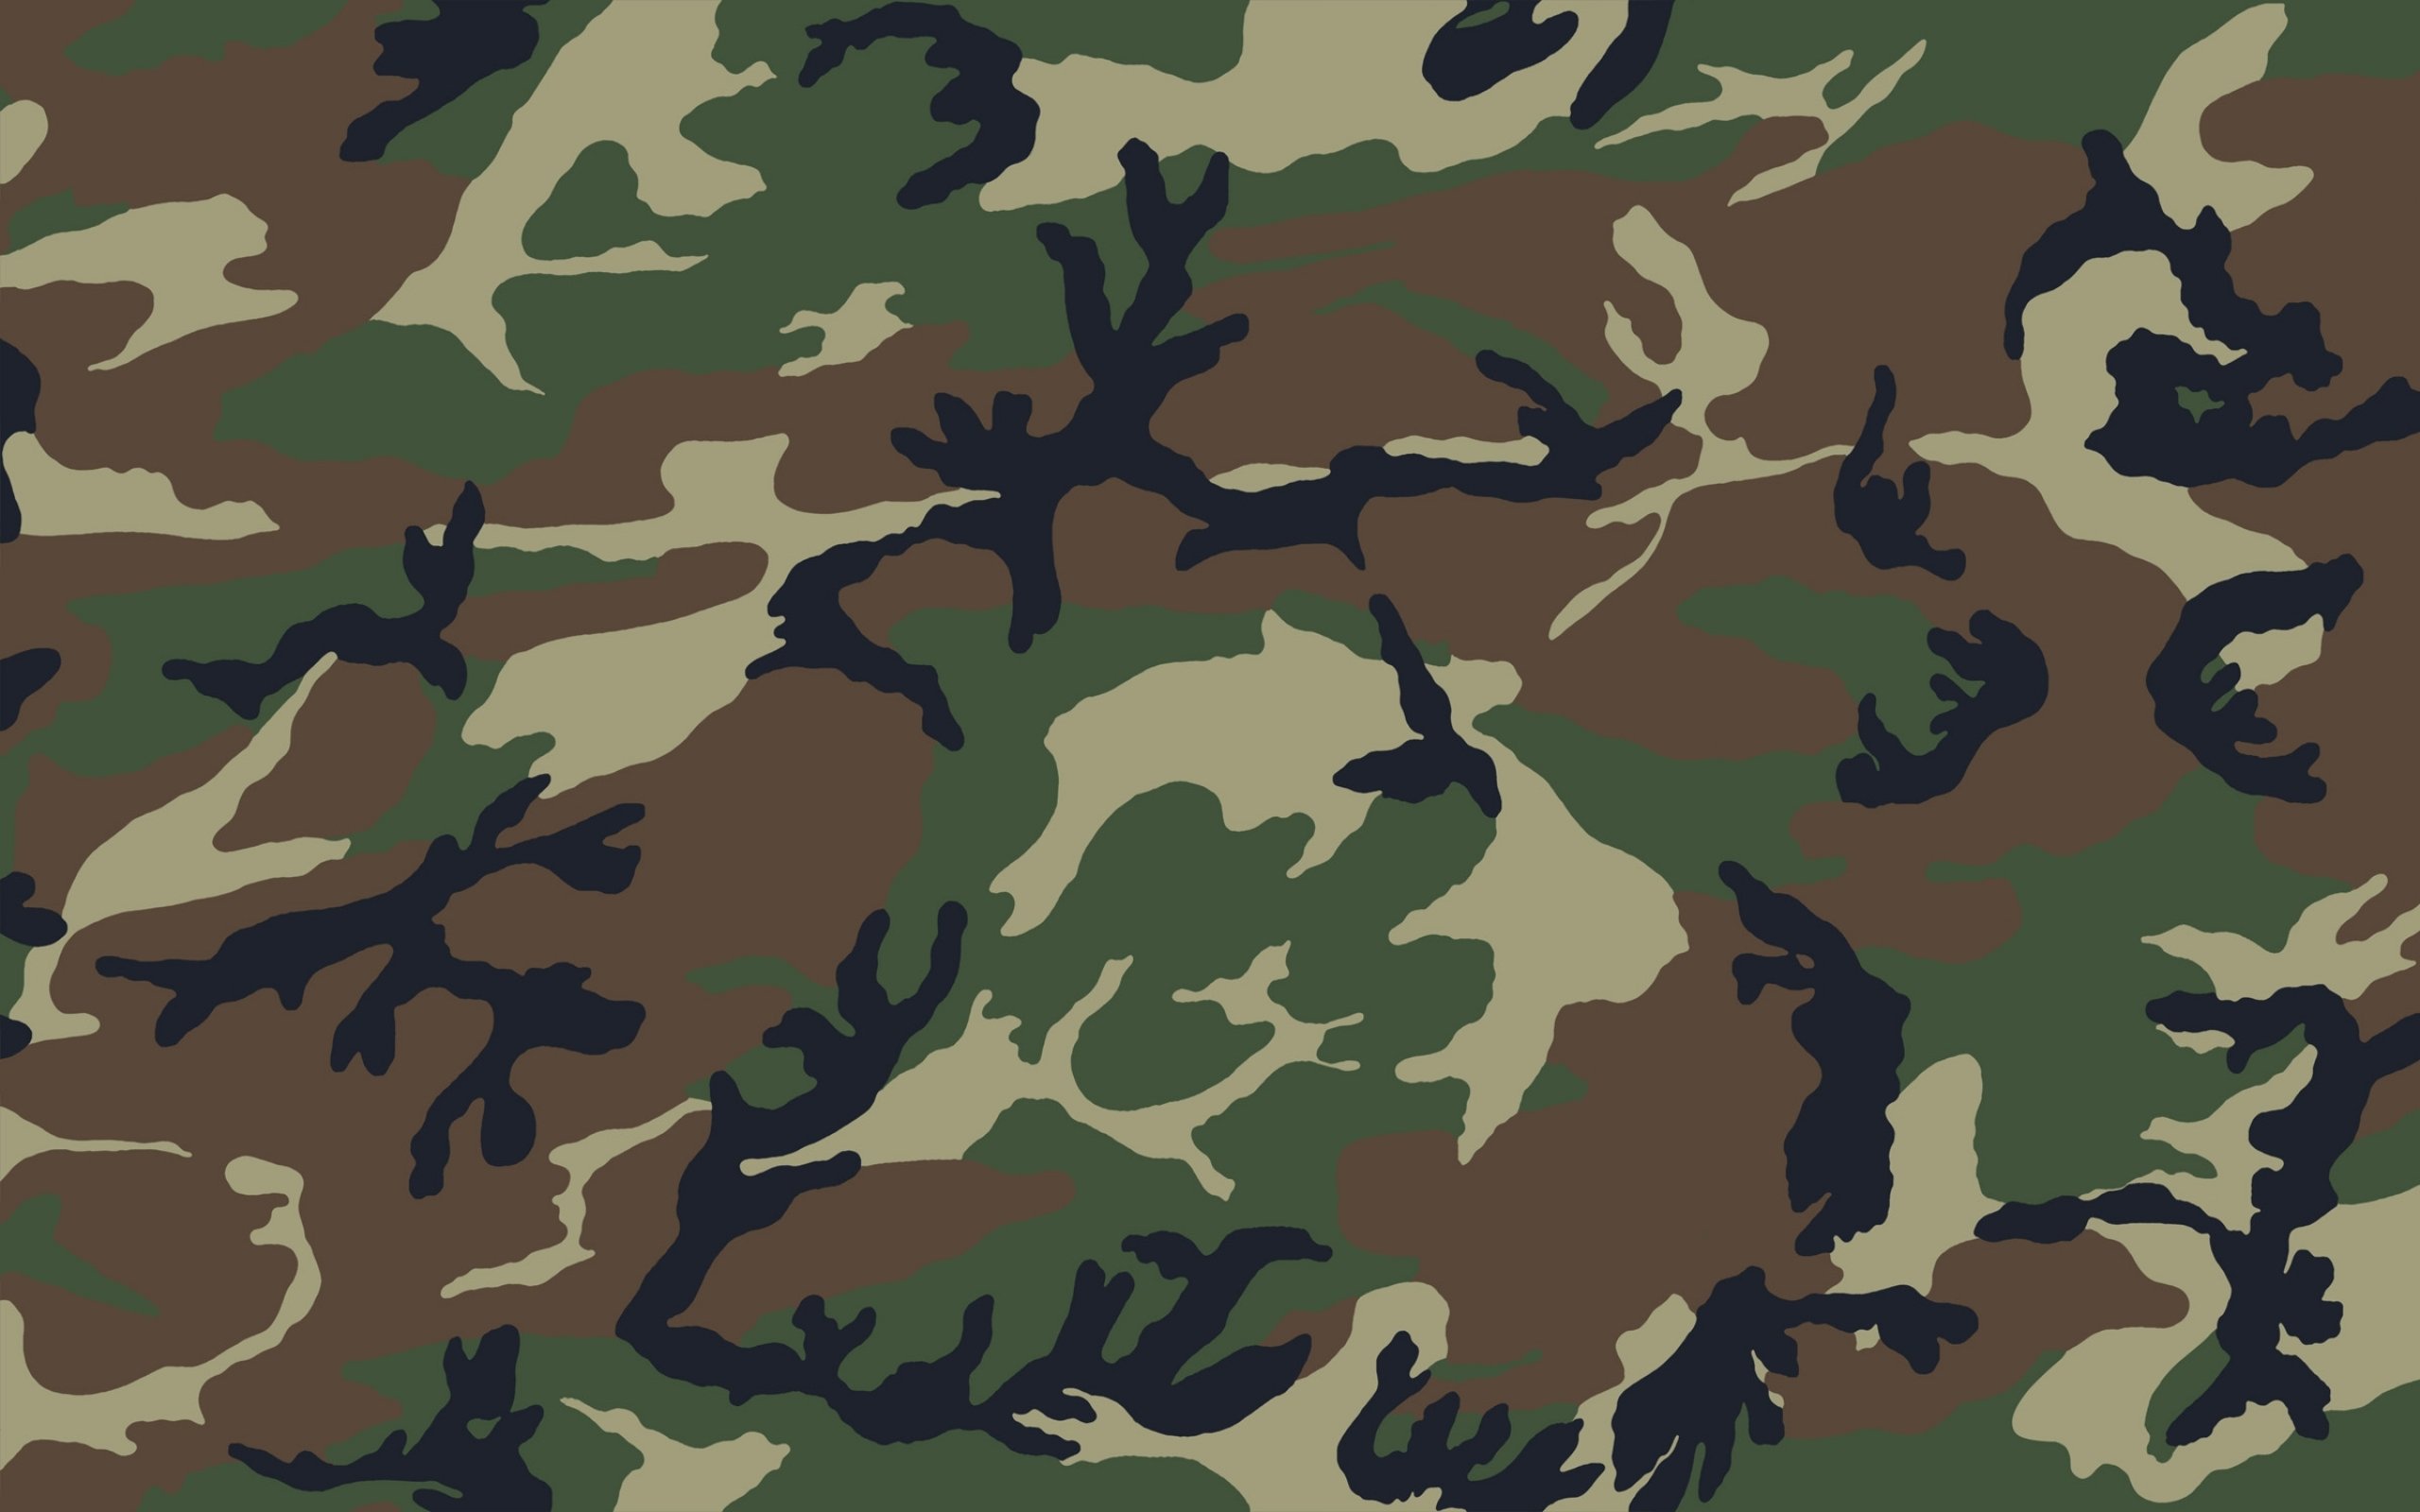  camouflage 3000x1500 wallpaper Wallpaper Free Wallpapers Download